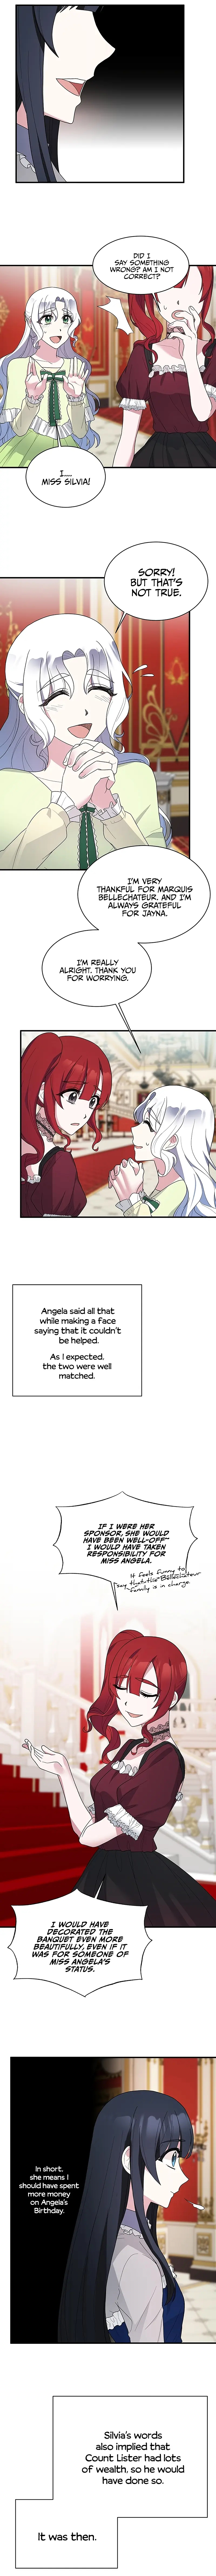 Angelic Lady - Page 3